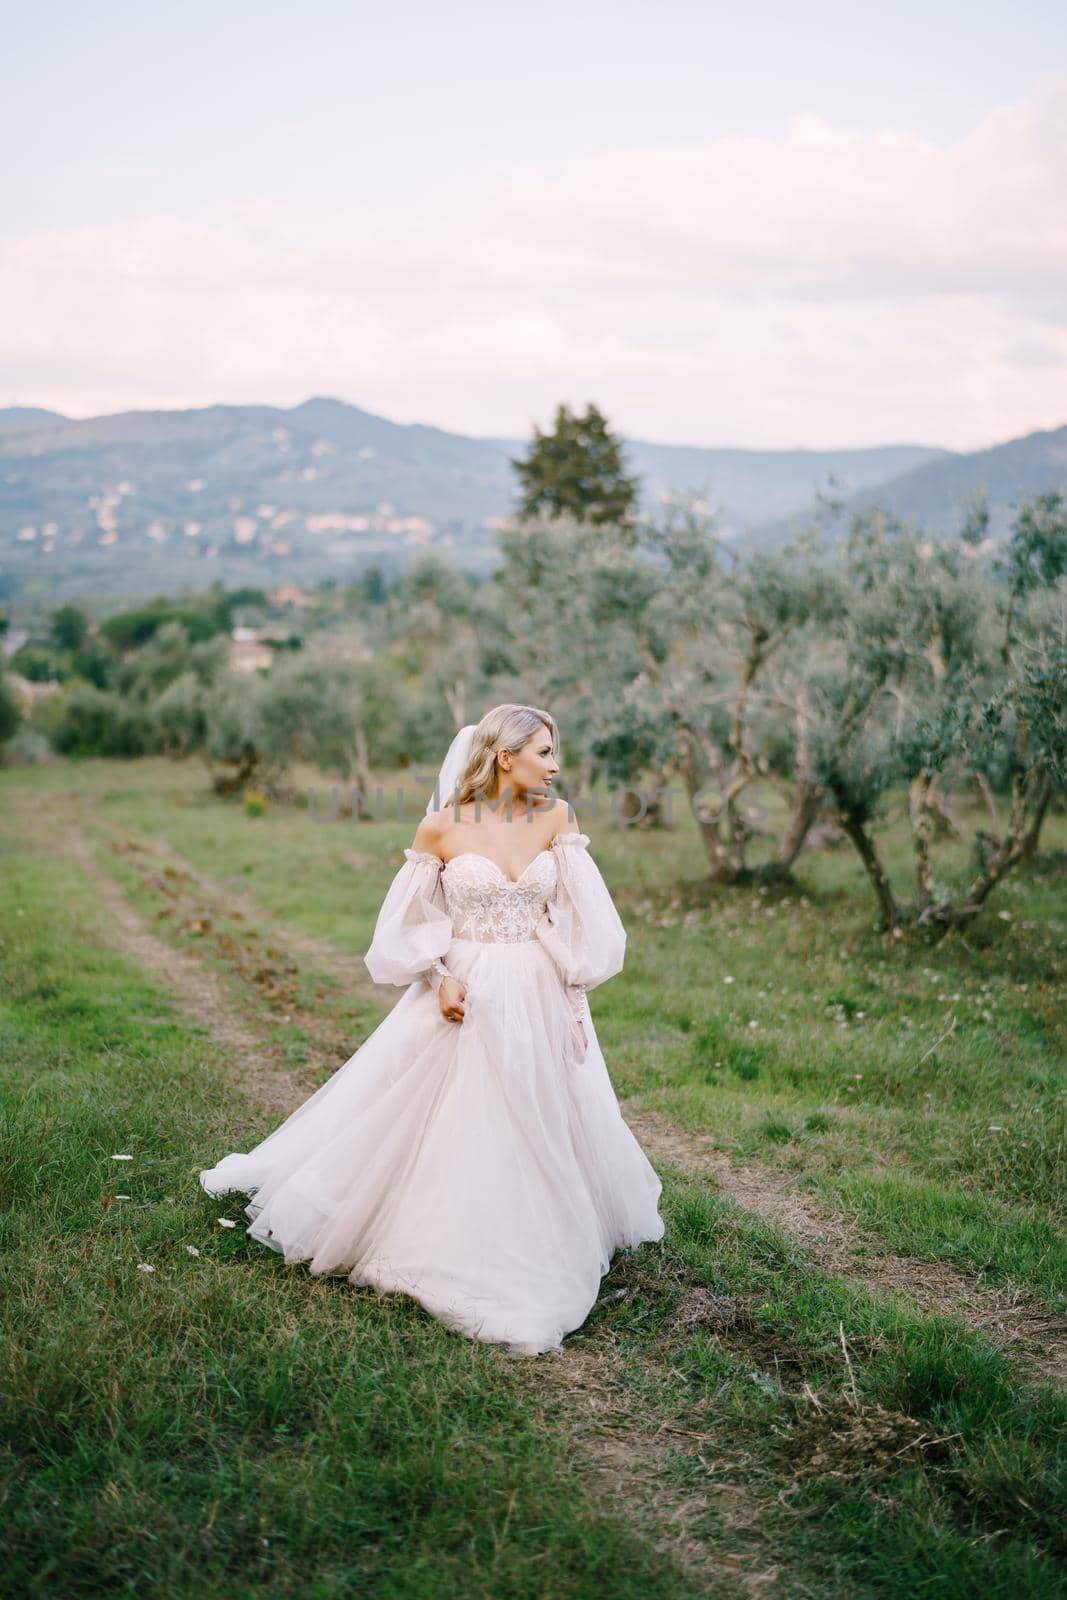 Wedding at an old winery villa in Tuscany, Italy. The bride in white wedding dress in an olive grove.